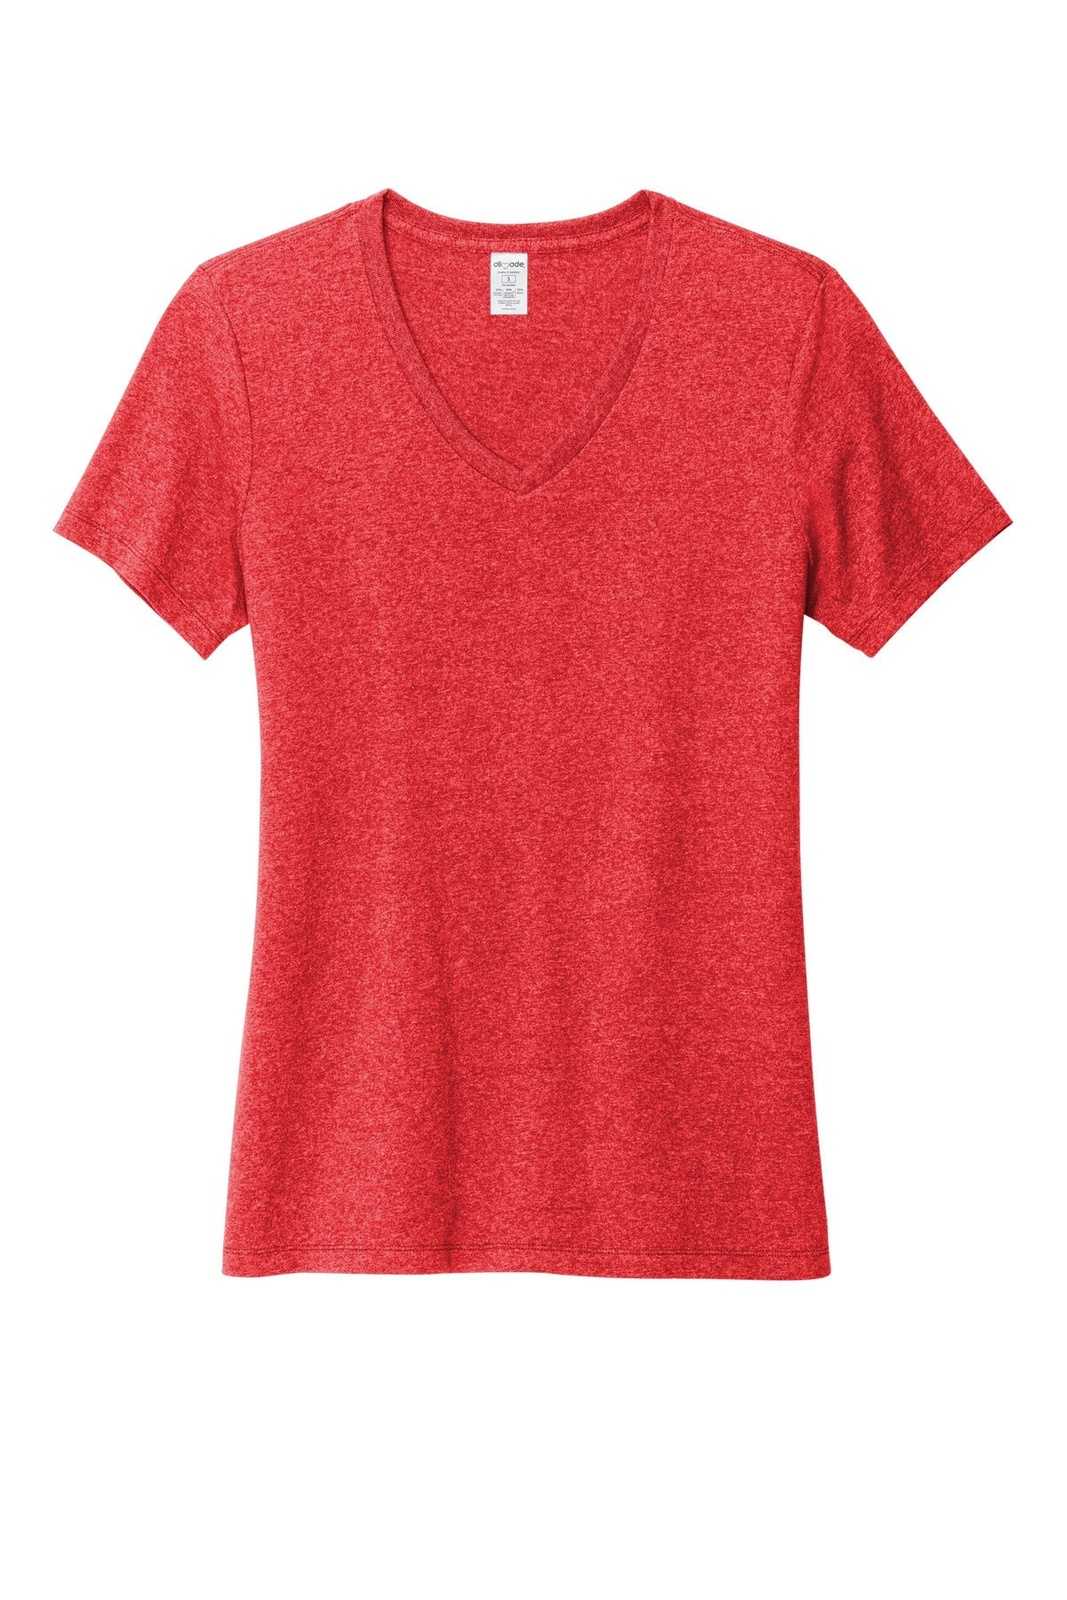 AllMade AL2303 Women's Recycled Blend V-Neck Tee - Reclaimed Red Heather - HIT a Double - 1